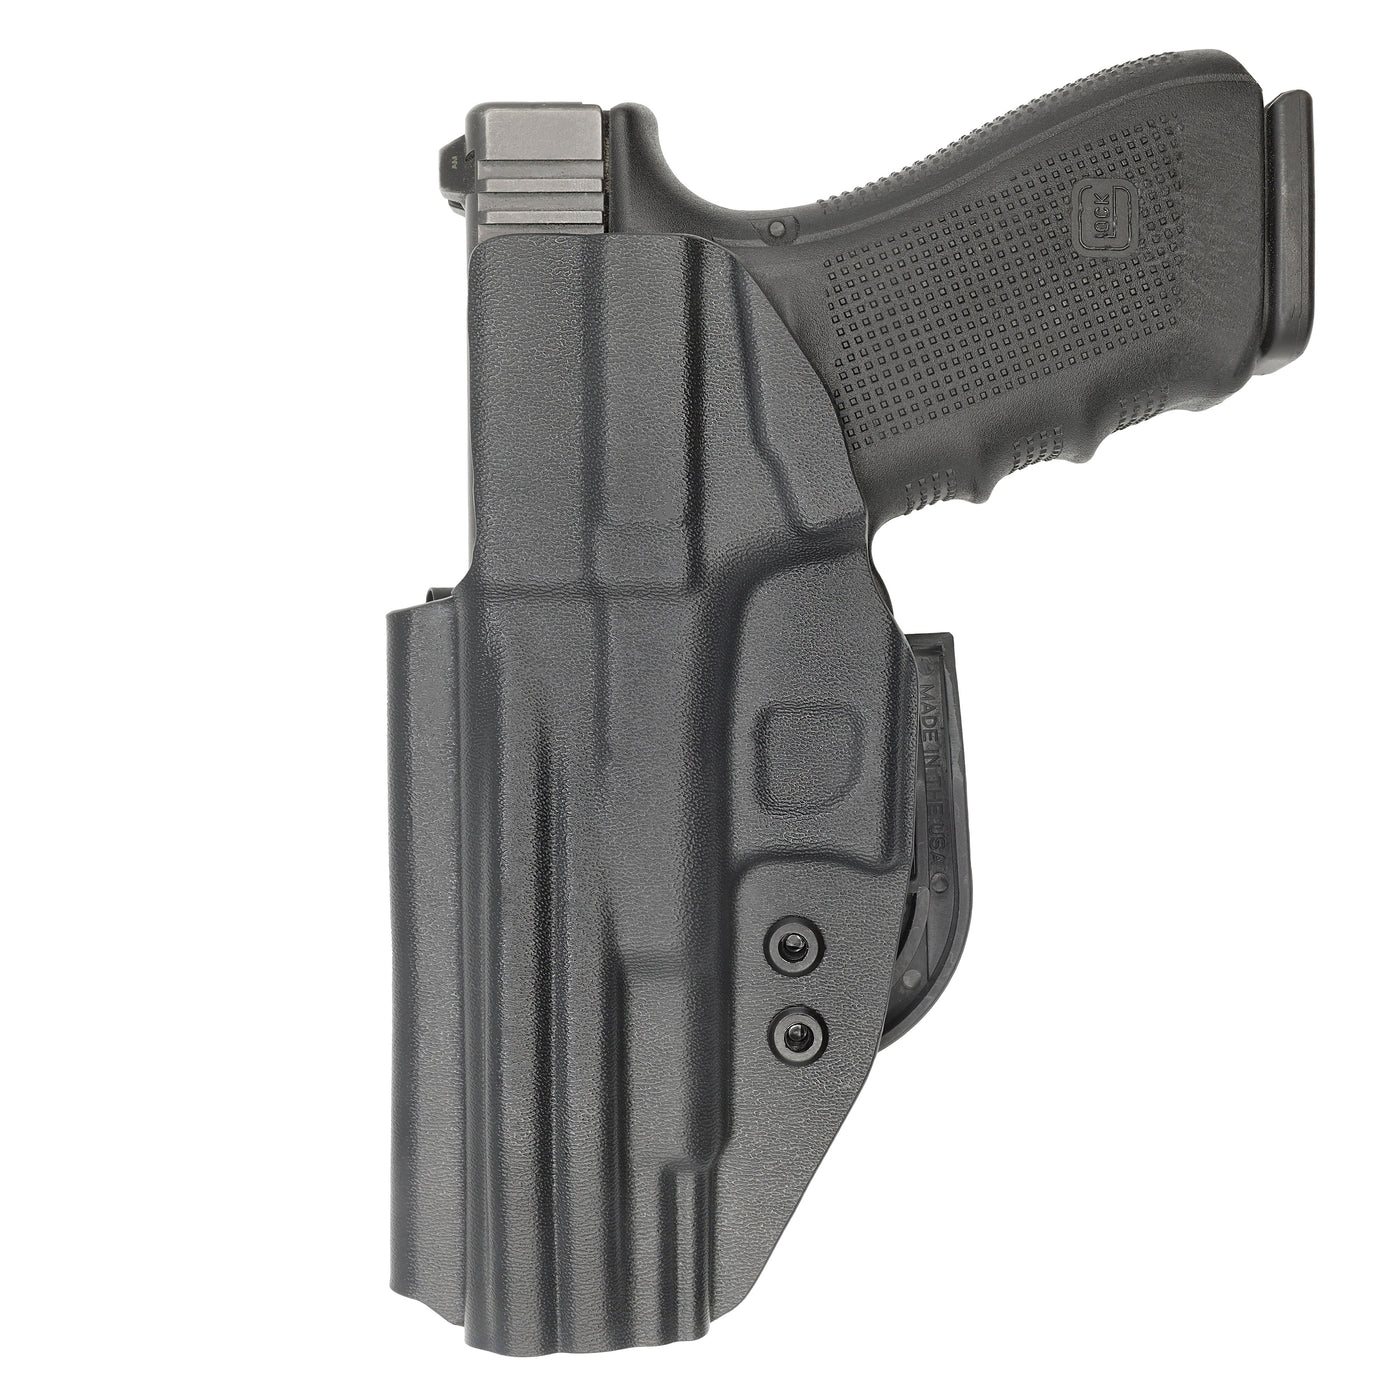 C&G Holsters Quickship IWB ALPHA UPGRADE Covert Glock 20/21 in holstered position back view